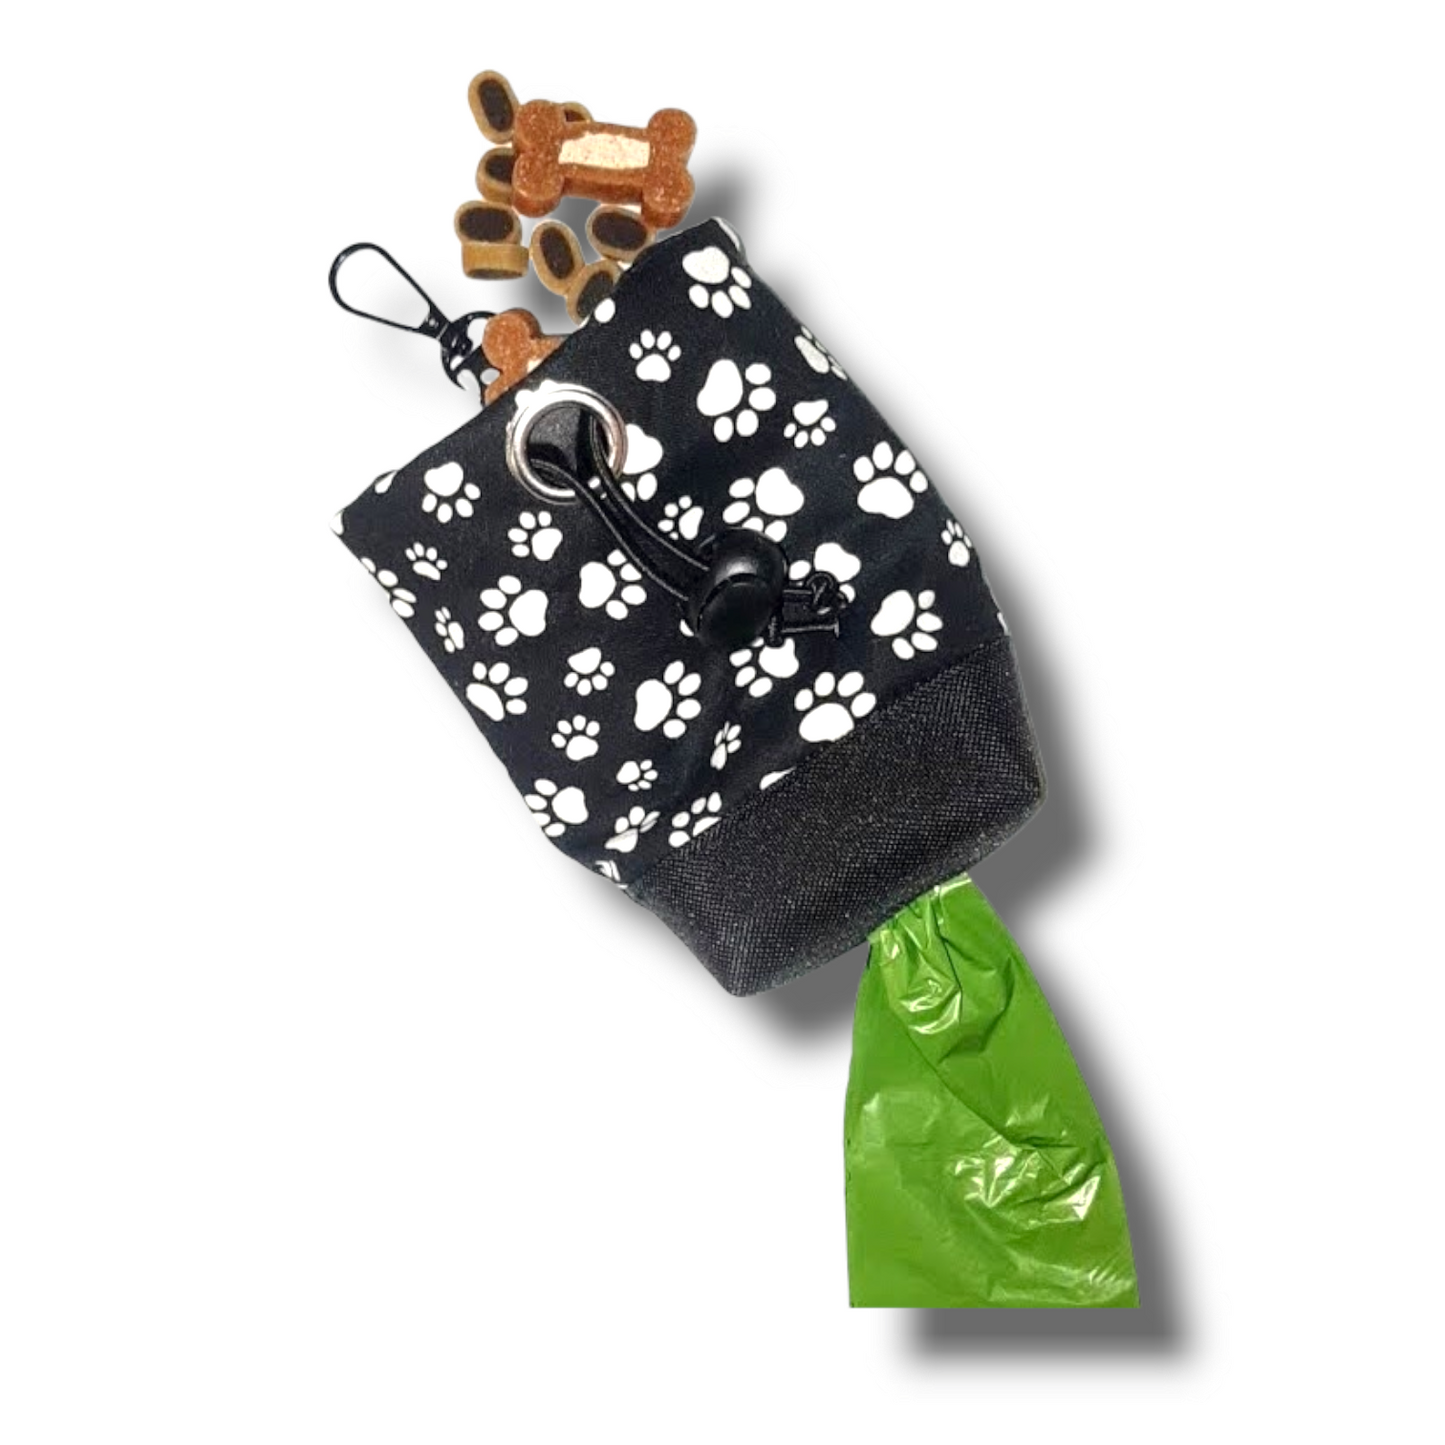 Skull print dog treat bag with poo bag holder compartment and drawstring opening/closing